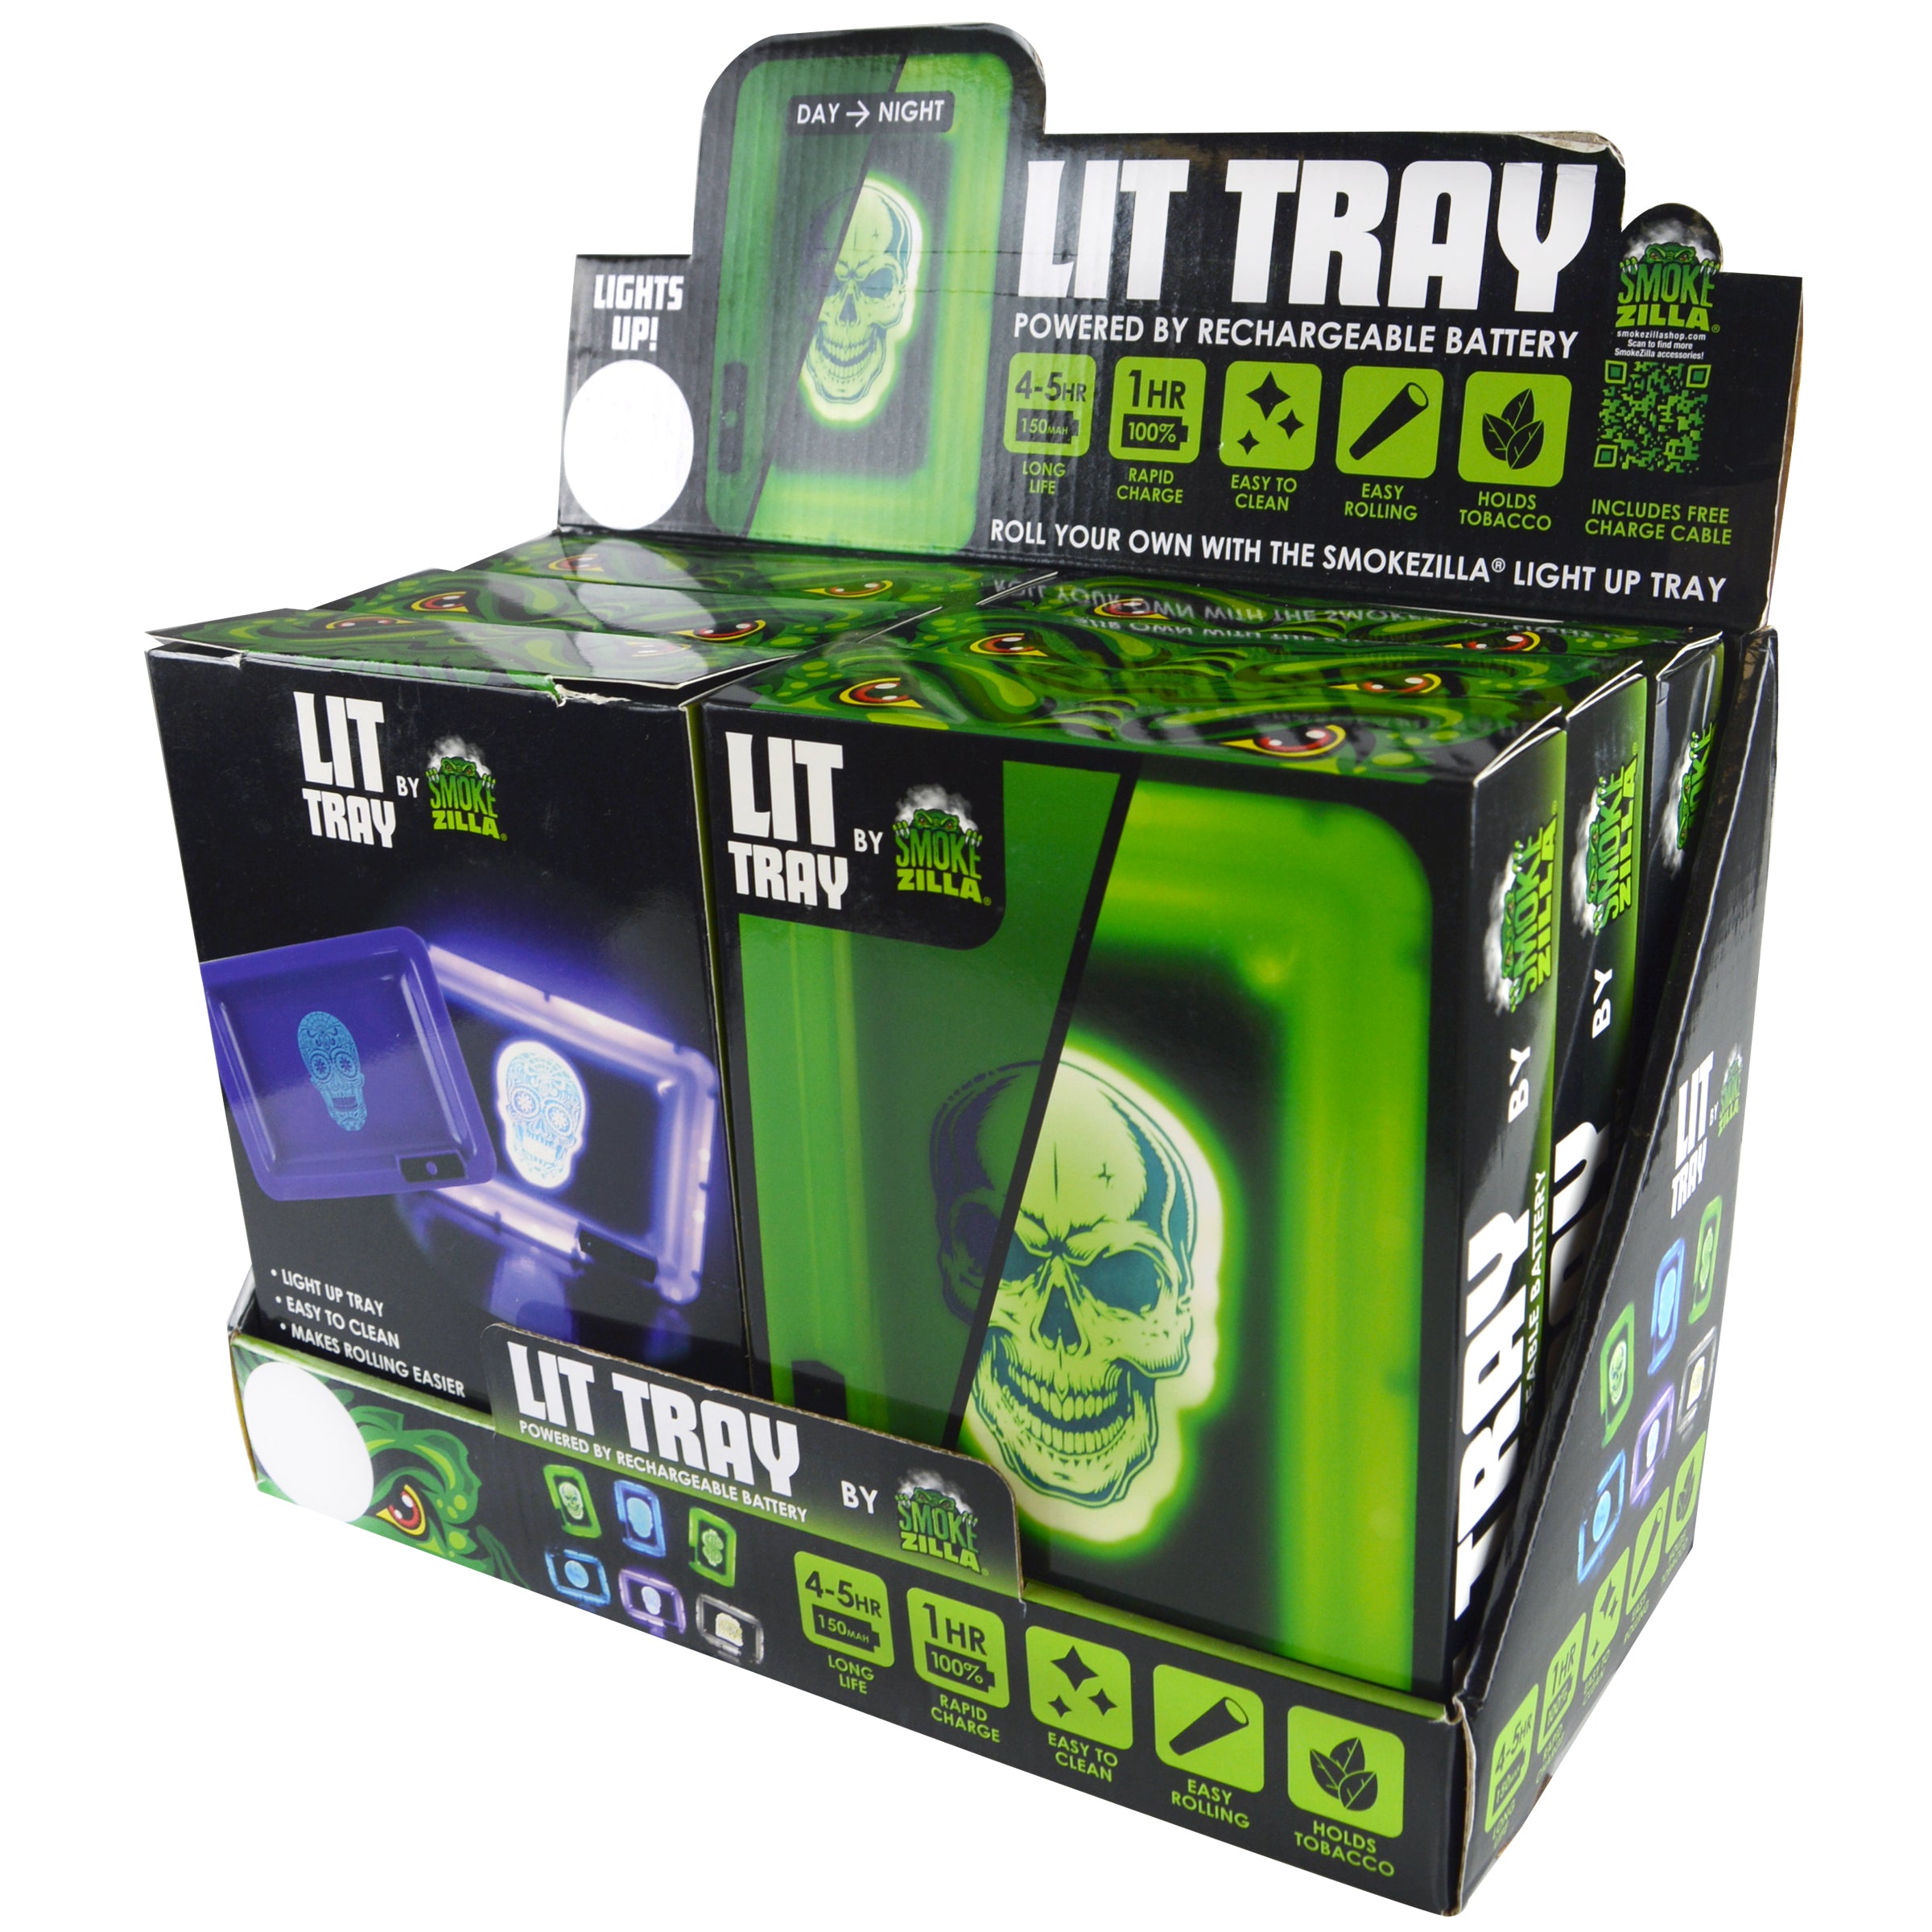 A51 LED Rolling Tray & Scale Kit (BUY 5 GET 1 FREE) - VGI Distribution